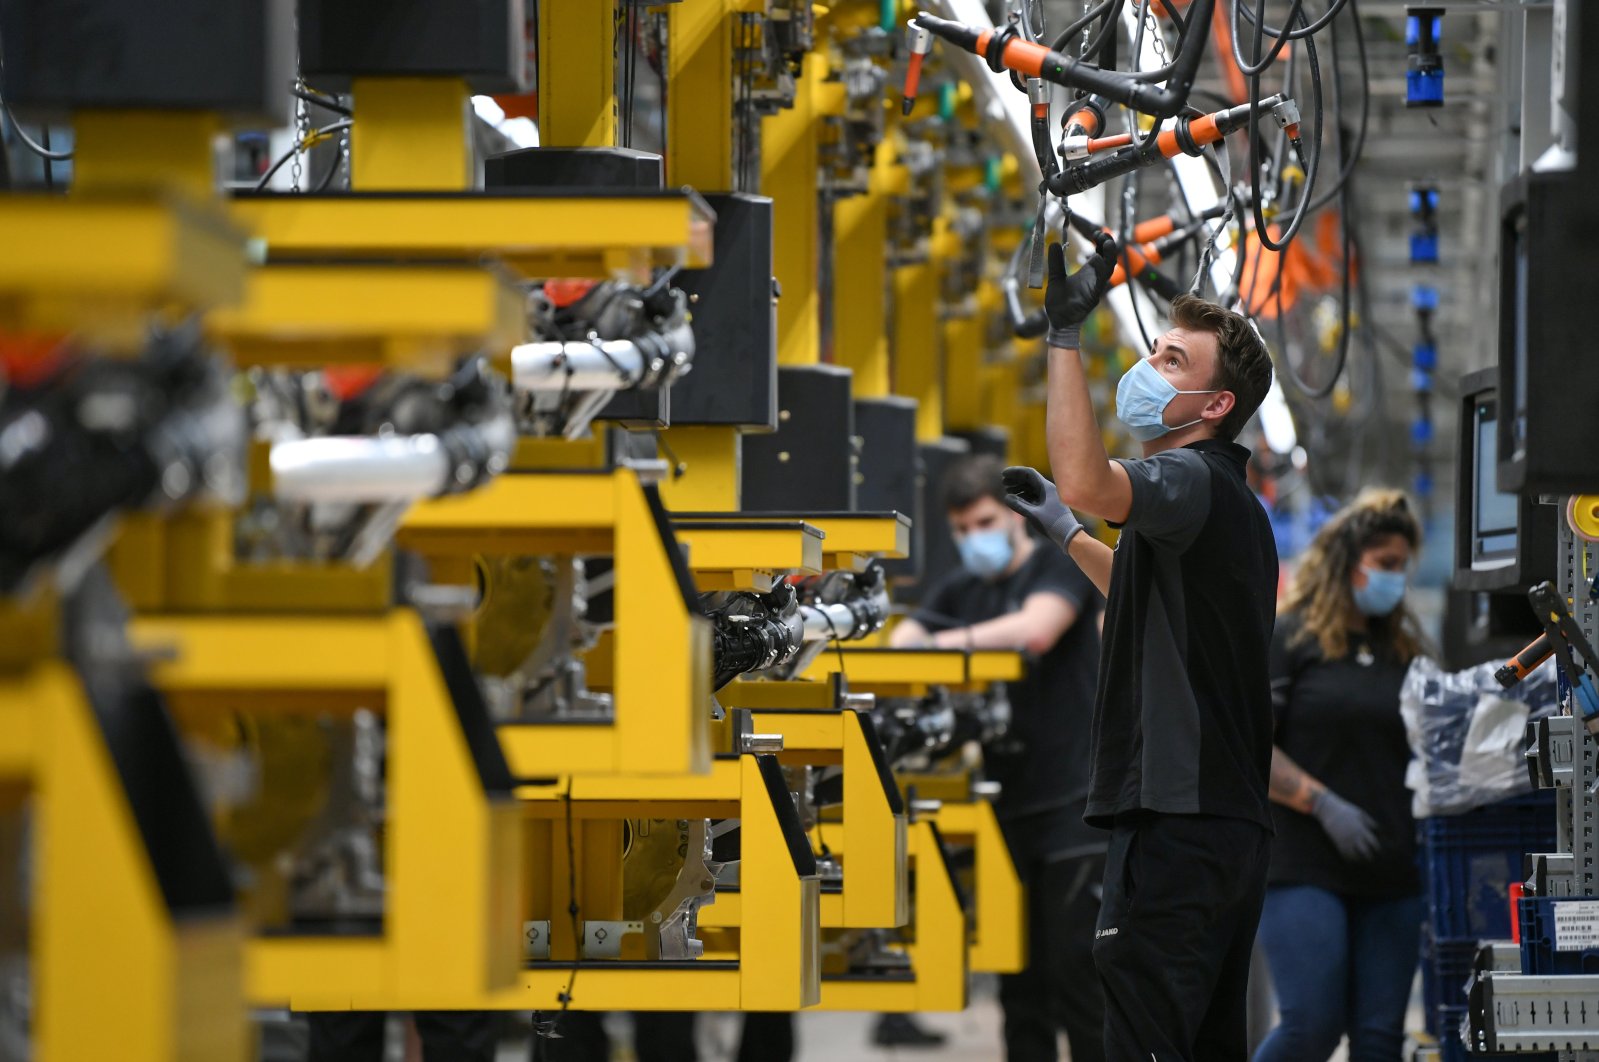 Workers assemble engines for Mercedes-Benz S-class models at the Daimler Powertrain plant in Bad Cannstatt, as the spread of the coronavirus continues near Stuttgart, Germany, April 22, 2020. (Reuters Photo)